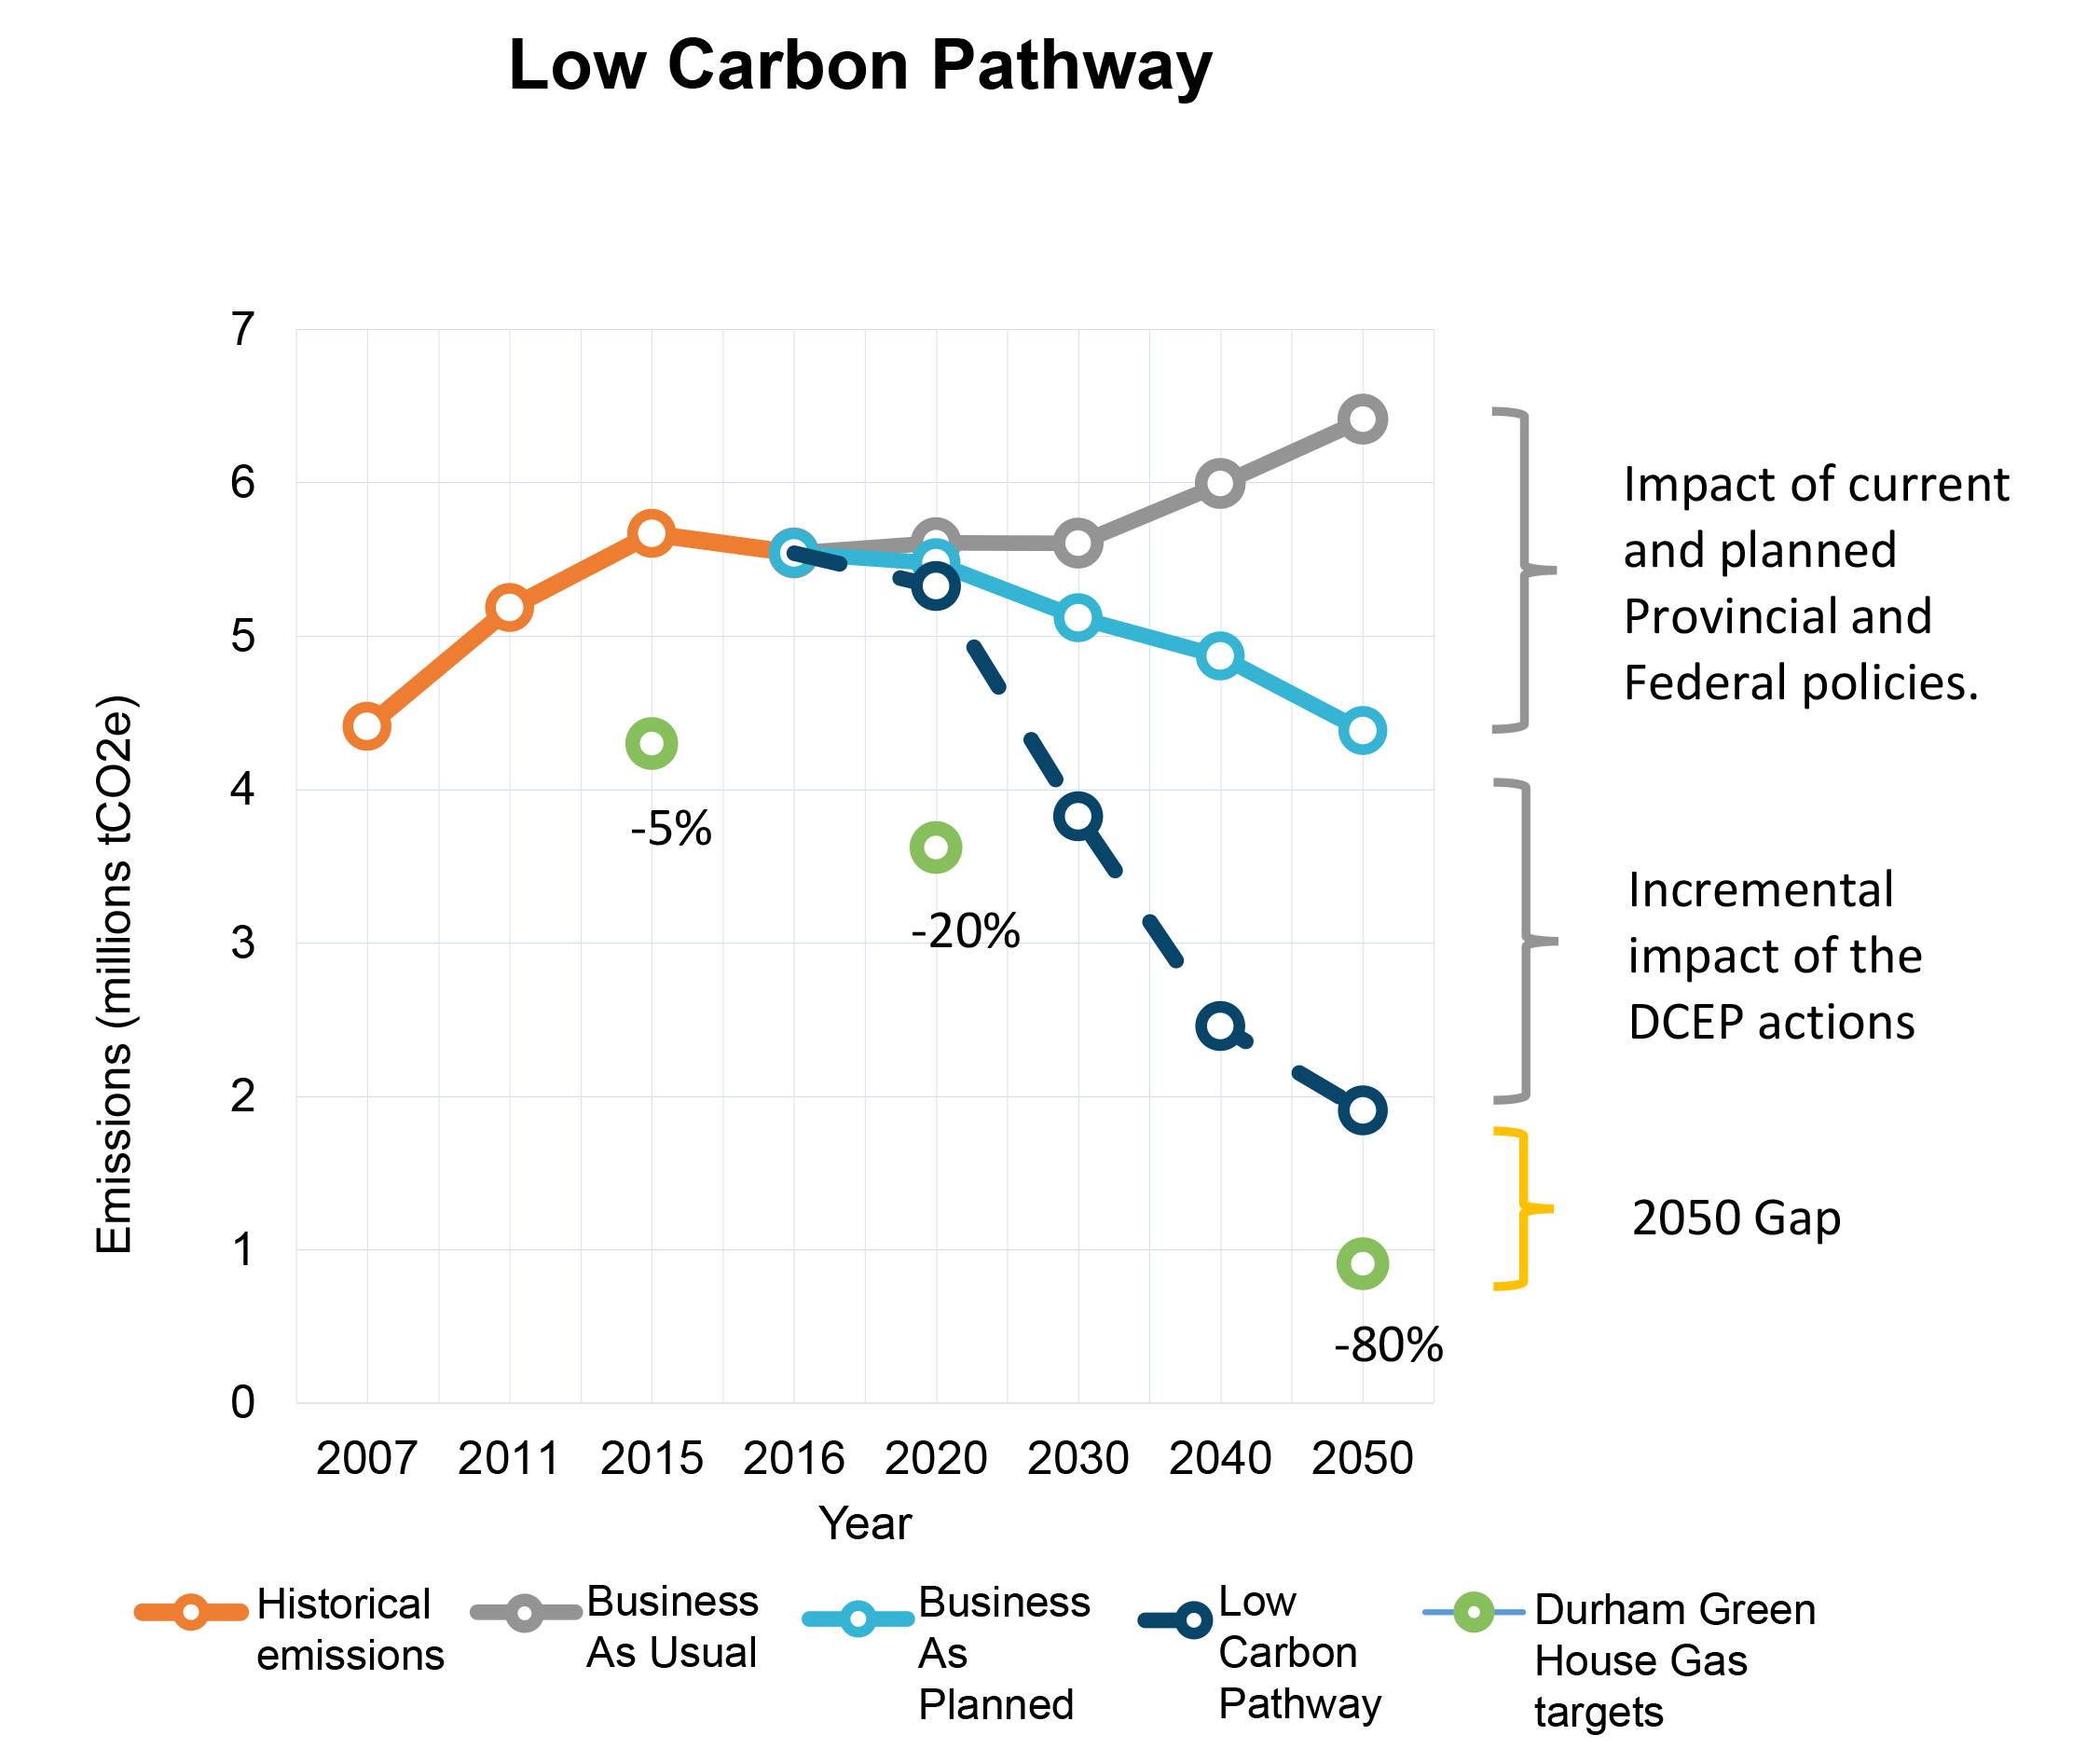 A chart outlining GHG trajectory over the next few decades. This link will open the chart. Contant Ian McVey at Ian.McVey@durham.ca